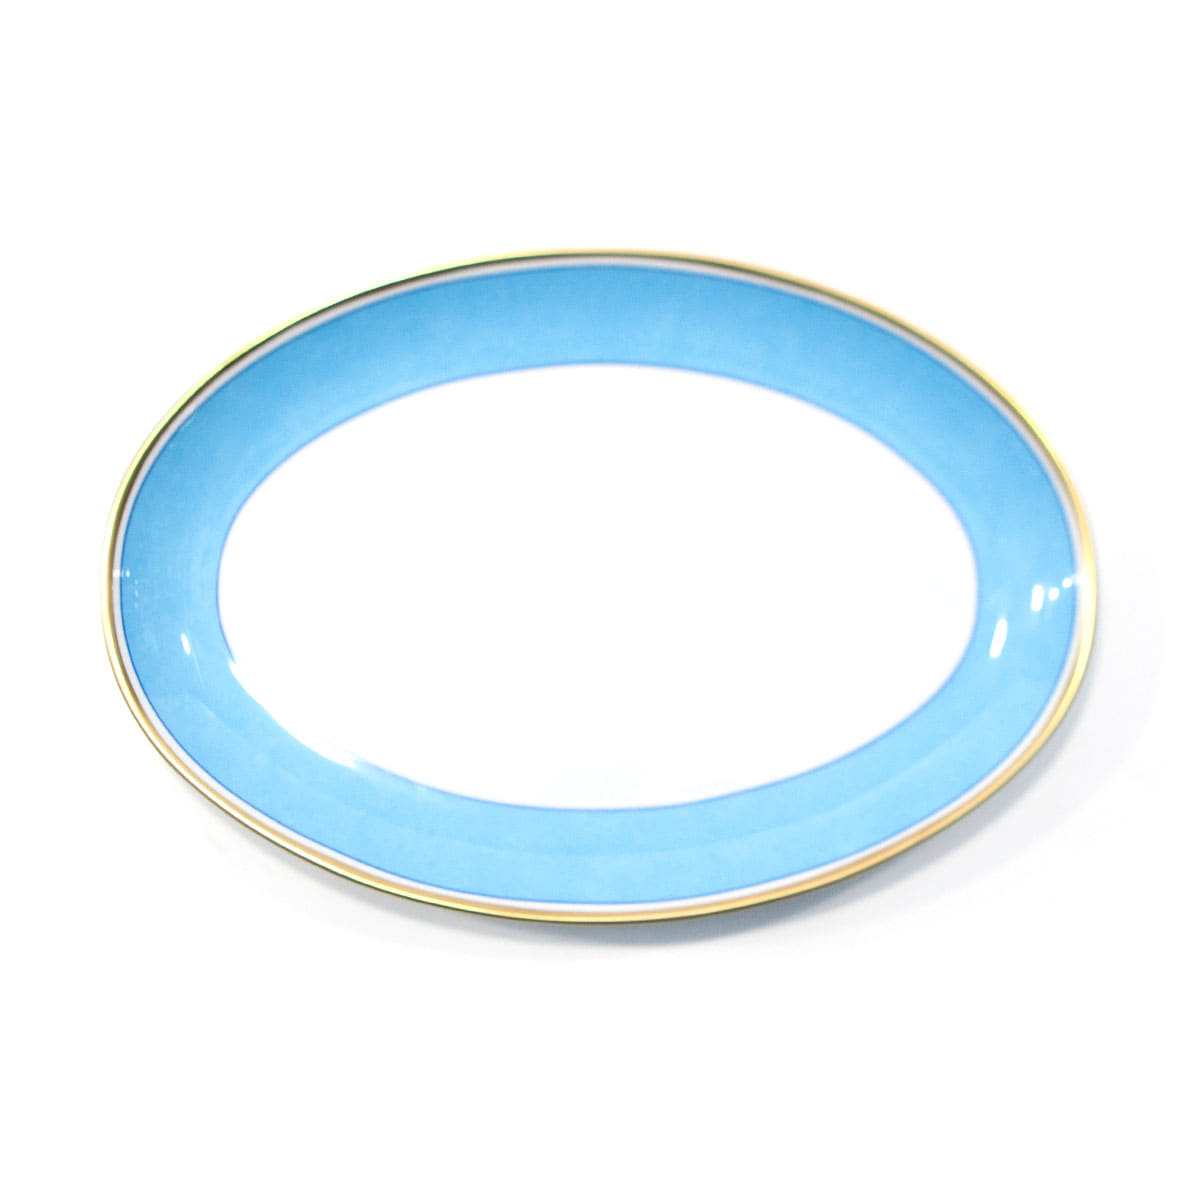 REICHENBACHColor Oval Platter 리첸바흐 컬러 오발 플래터 (블루) (35.5 x 24.5)MADE  IN  GERMANY